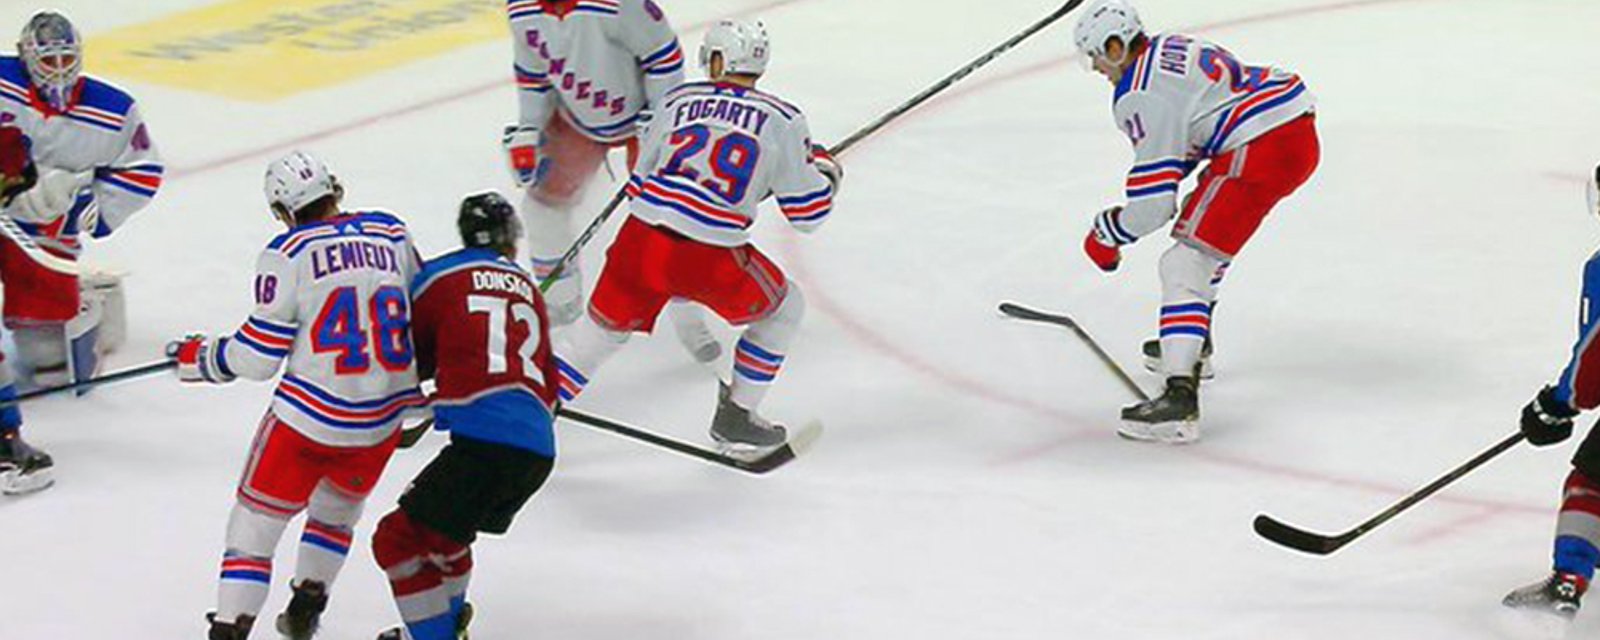 Rangers forward Lemieux suspended for hit that happened four months ago!